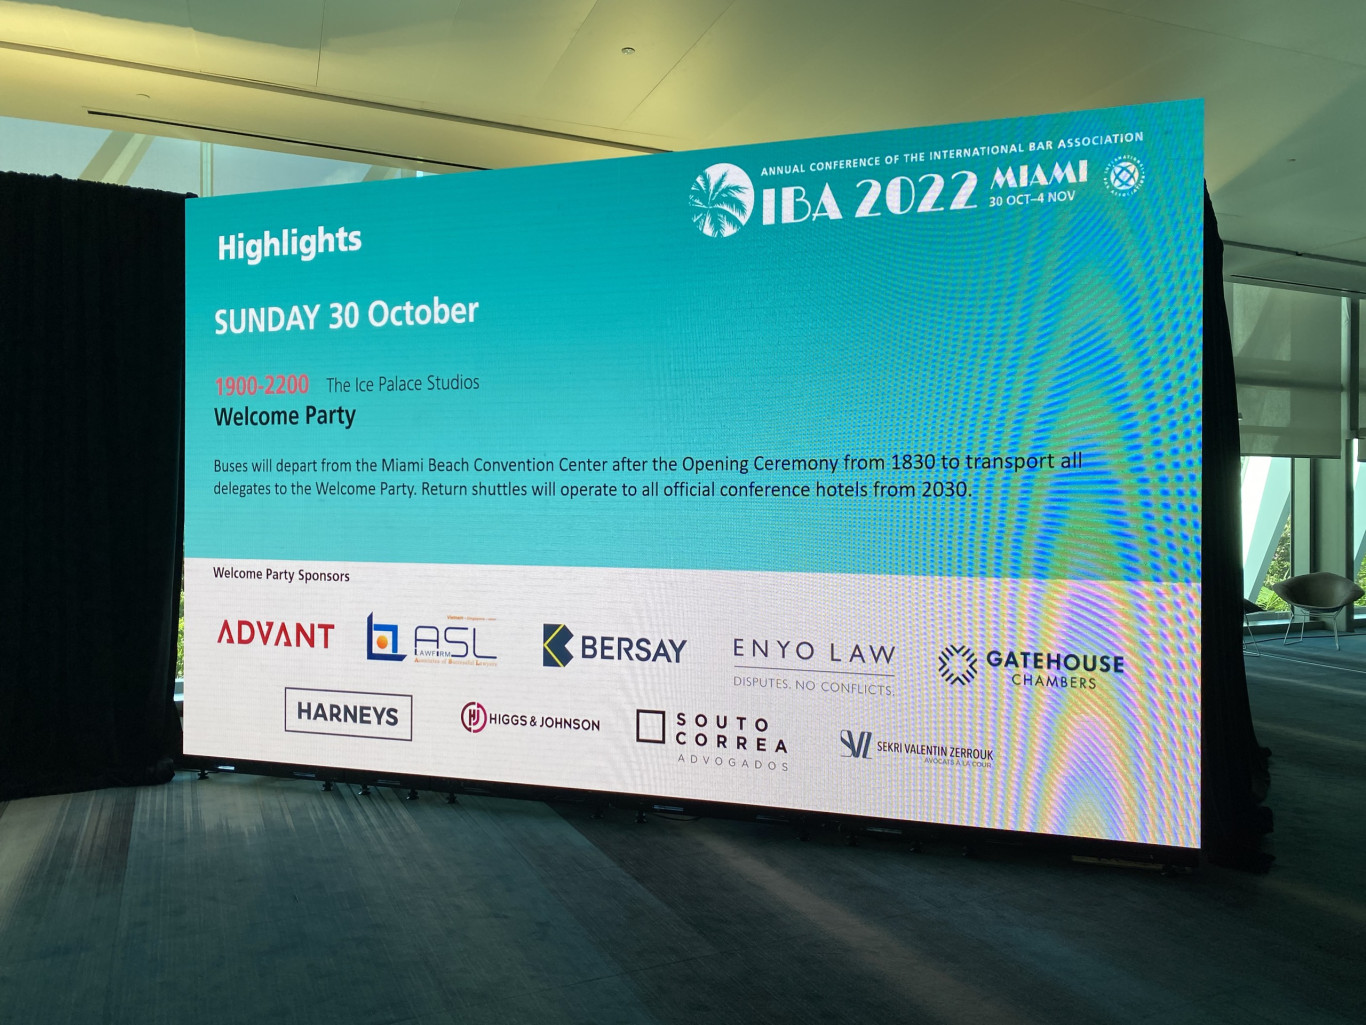 ASL LAW is sponsor for IBA 2022 in Miami, USA